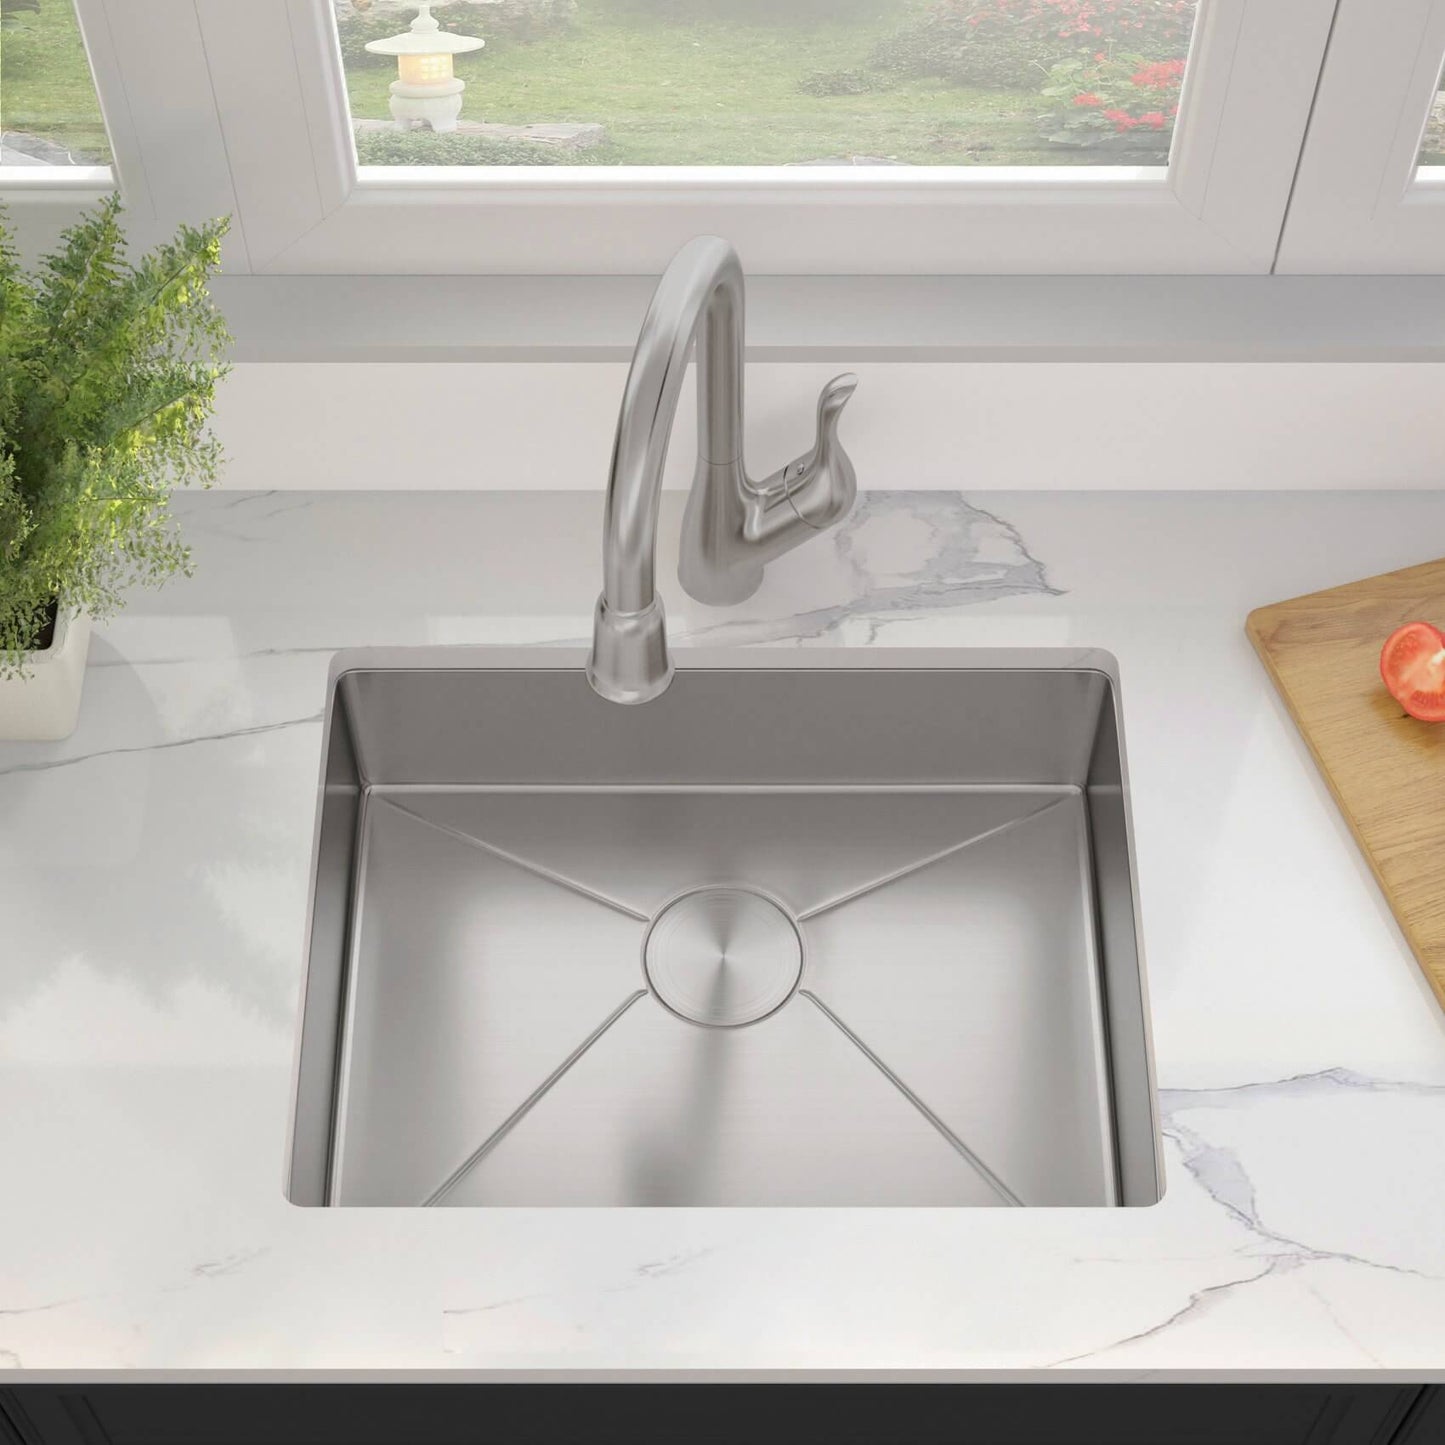 A pull out faucet is mounted over an ADA Kitchen Sink